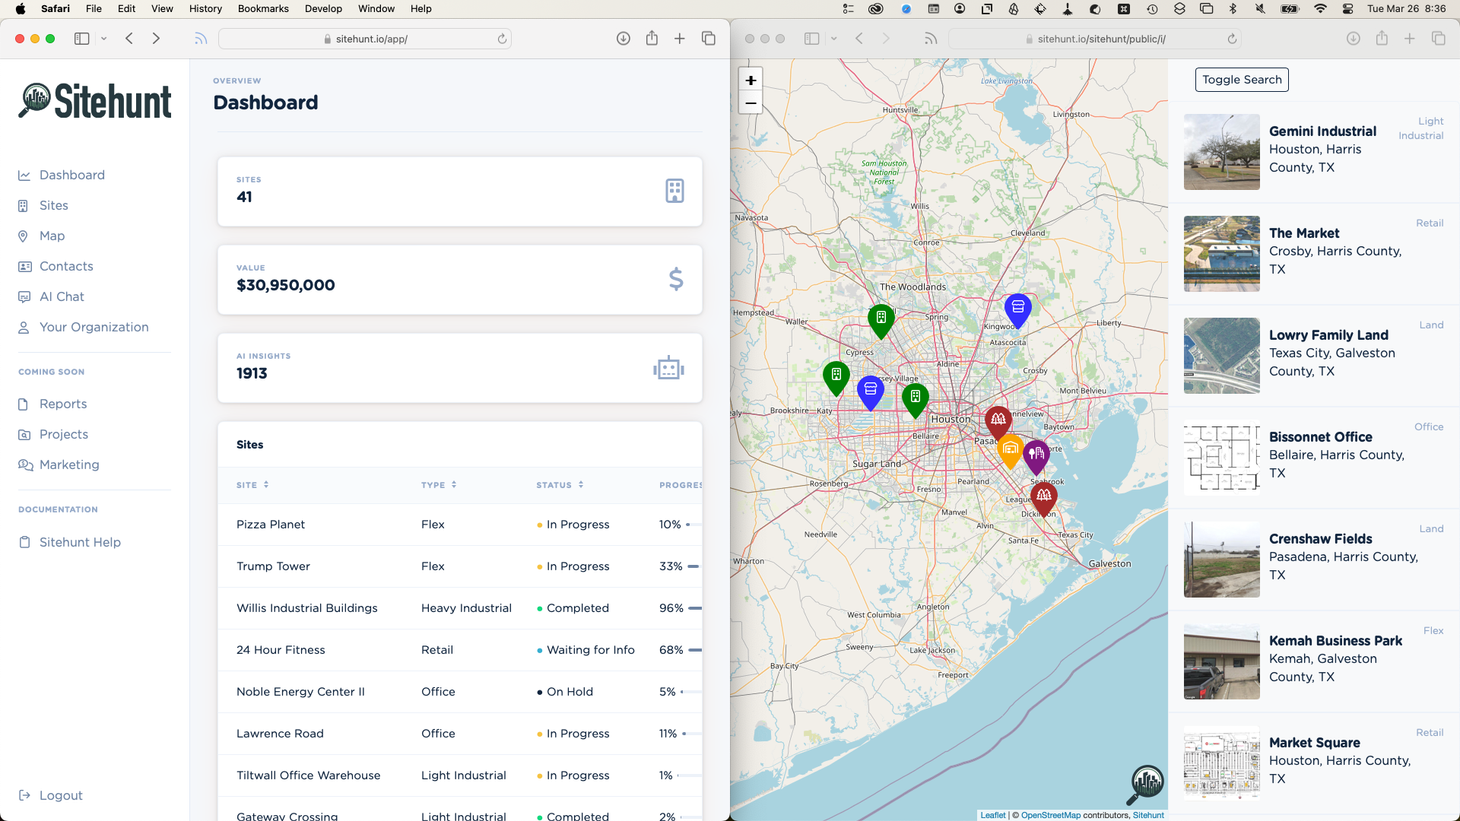 Exciting Enhancements to Sitehunt: Your Essential Tool for Economic Development